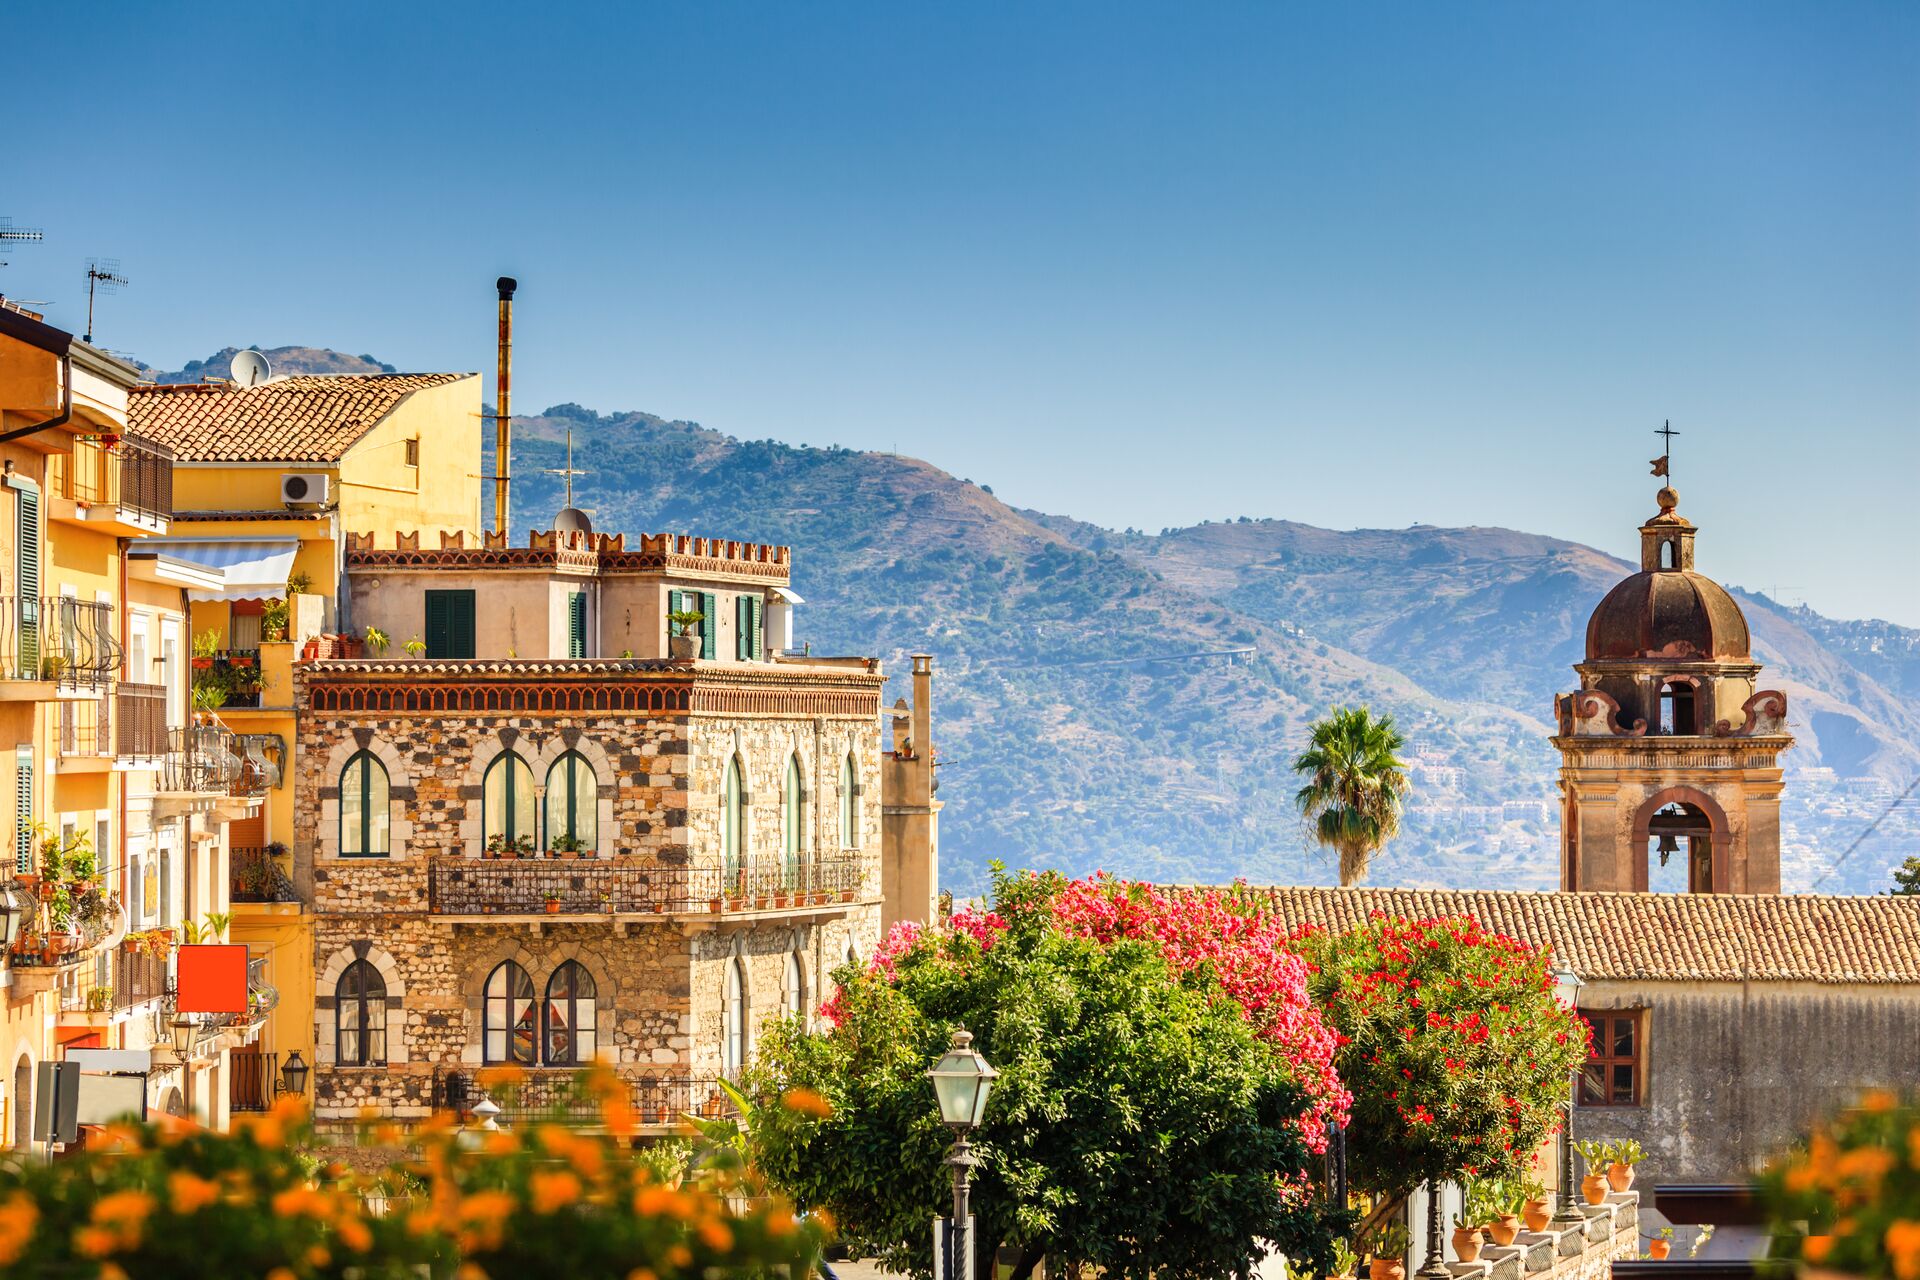 Fascinating Sicilian history to discover in the ancient town of Taormina